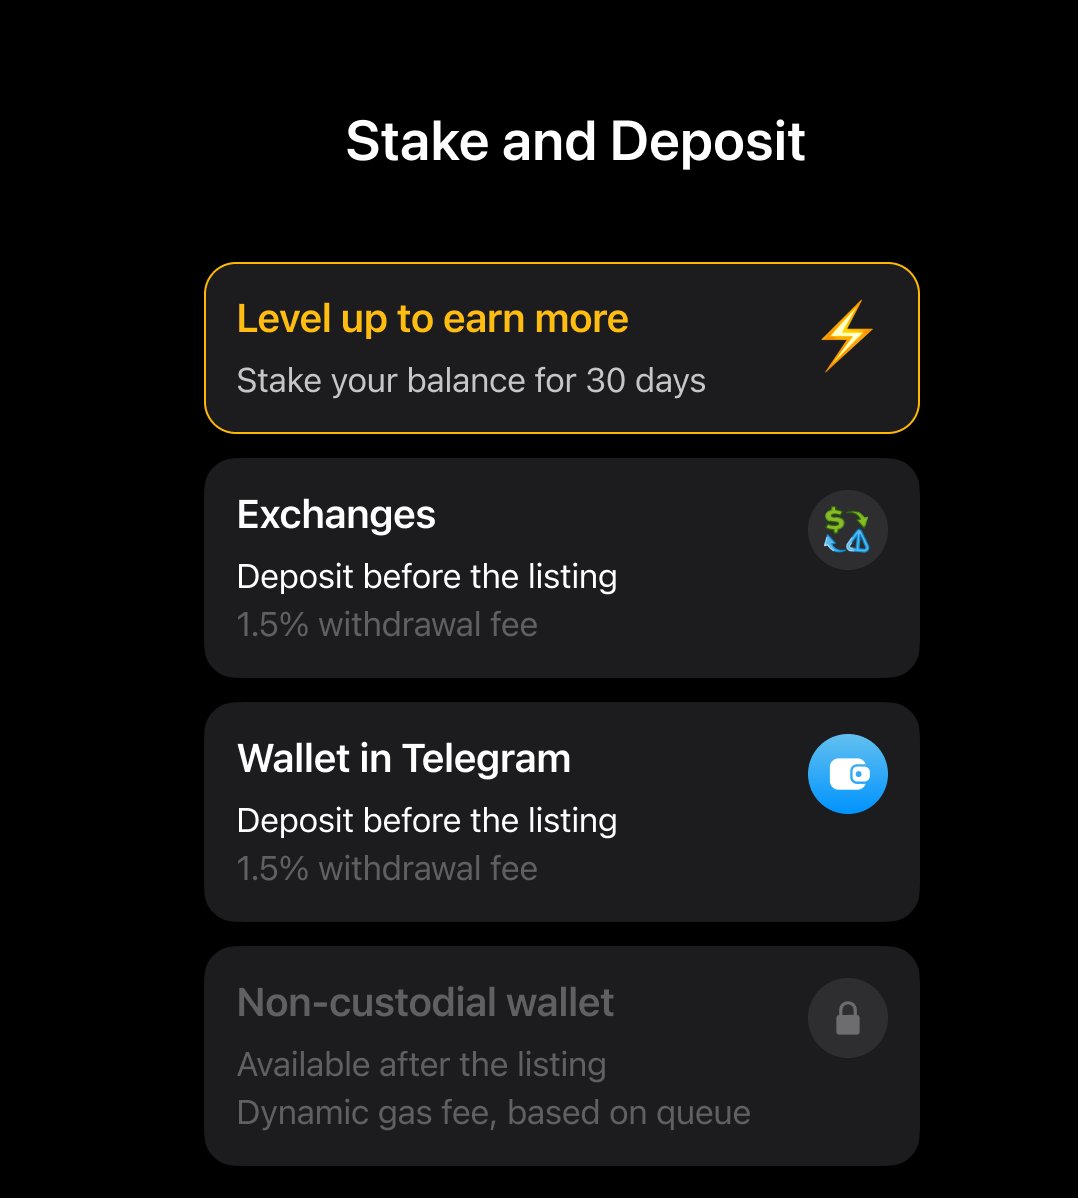 Notcoin Claim is gradually rolling out since yesterday Here are the options you have before the listing on May 16, 12:00pm UTC Deposit Notcoin You can deposit your Notcoin directly to Binance, Bybit, OKX or Wallet in Telegram in advance, to have it ready on the listing date.…